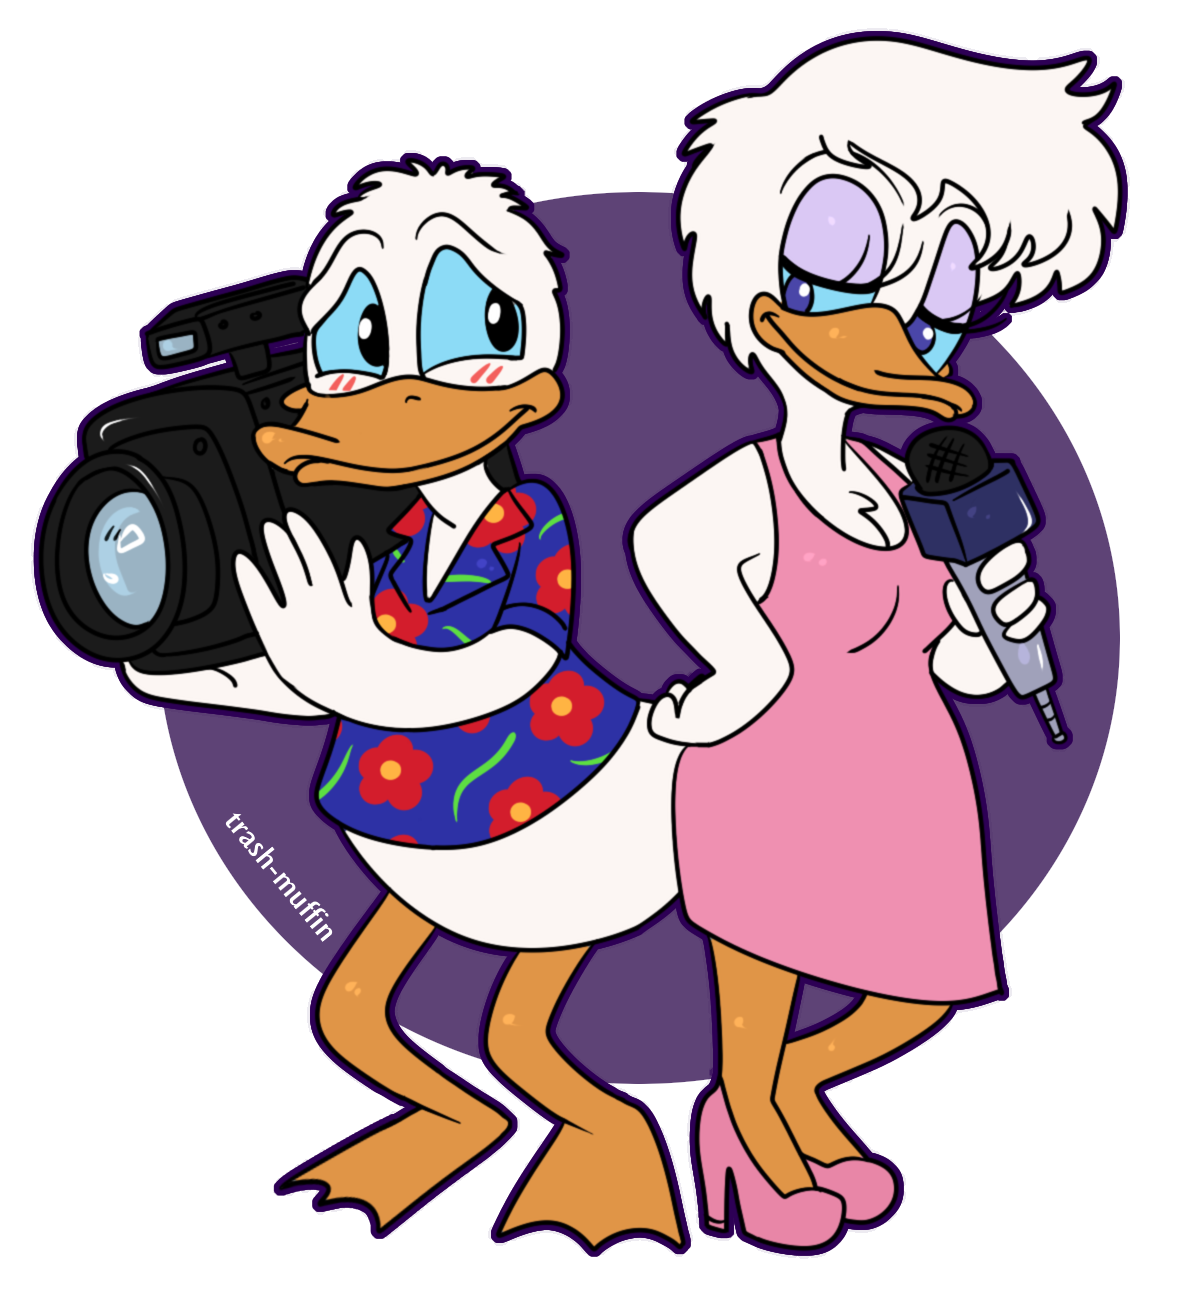 [fan] Daisy And Donald Quack Pack By Trash Muffin On Deviantart